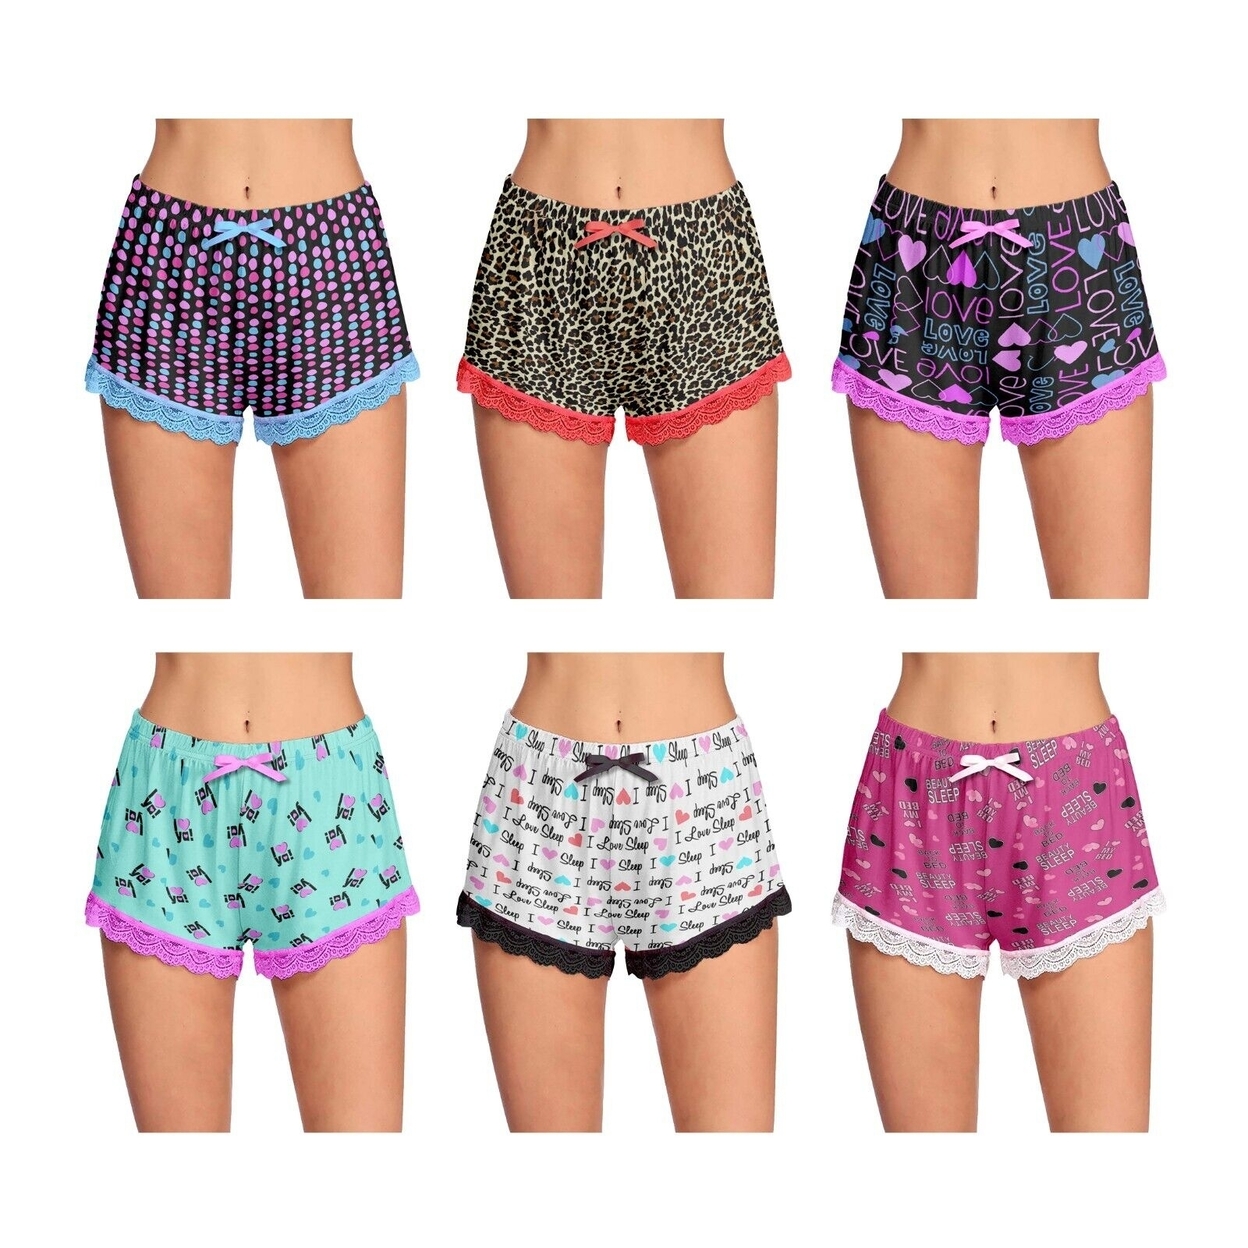 Multi-Pack: Women's Ultra-Soft Cozy Fun Printed Lace Trim Pajama Lounge Shorts - 3-pack, Large, Love